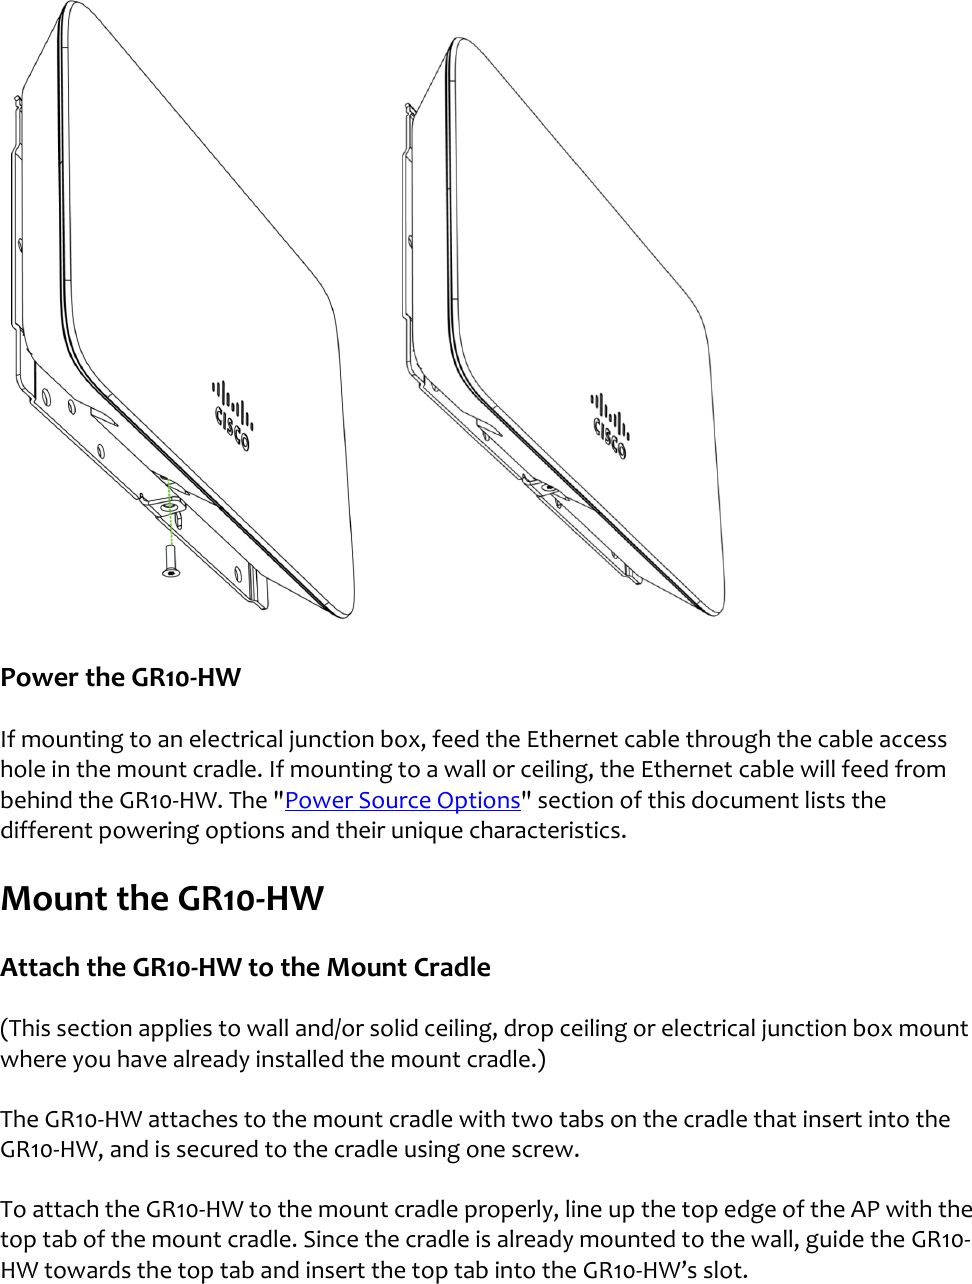   Power the GR10-HW If mounting to an electrical junction box, feed the Ethernet cable through the cable access hole in the mount cradle. If mounting to a wall or ceiling, the Ethernet cable will feed from behind the GR10-HW. The &quot;Power Source Options&quot; section of this document lists the different powering options and their unique characteristics.  Mount the GR10-HW Attach the GR10-HW to the Mount Cradle (This section applies to wall and/or solid ceiling, drop ceiling or electrical junction box mount  where you have already installed the mount cradle.) The GR10-HW attaches to the mount cradle with two tabs on the cradle that insert into the GR10-HW, and is secured to the cradle using one screw. To attach the GR10-HW to the mount cradle properly, line up the top edge of the AP with the top tab of the mount cradle. Since the cradle is already mounted to the wall, guide the GR10-HW towards the top tab and insert the top tab into the GR10-HW’s slot. 